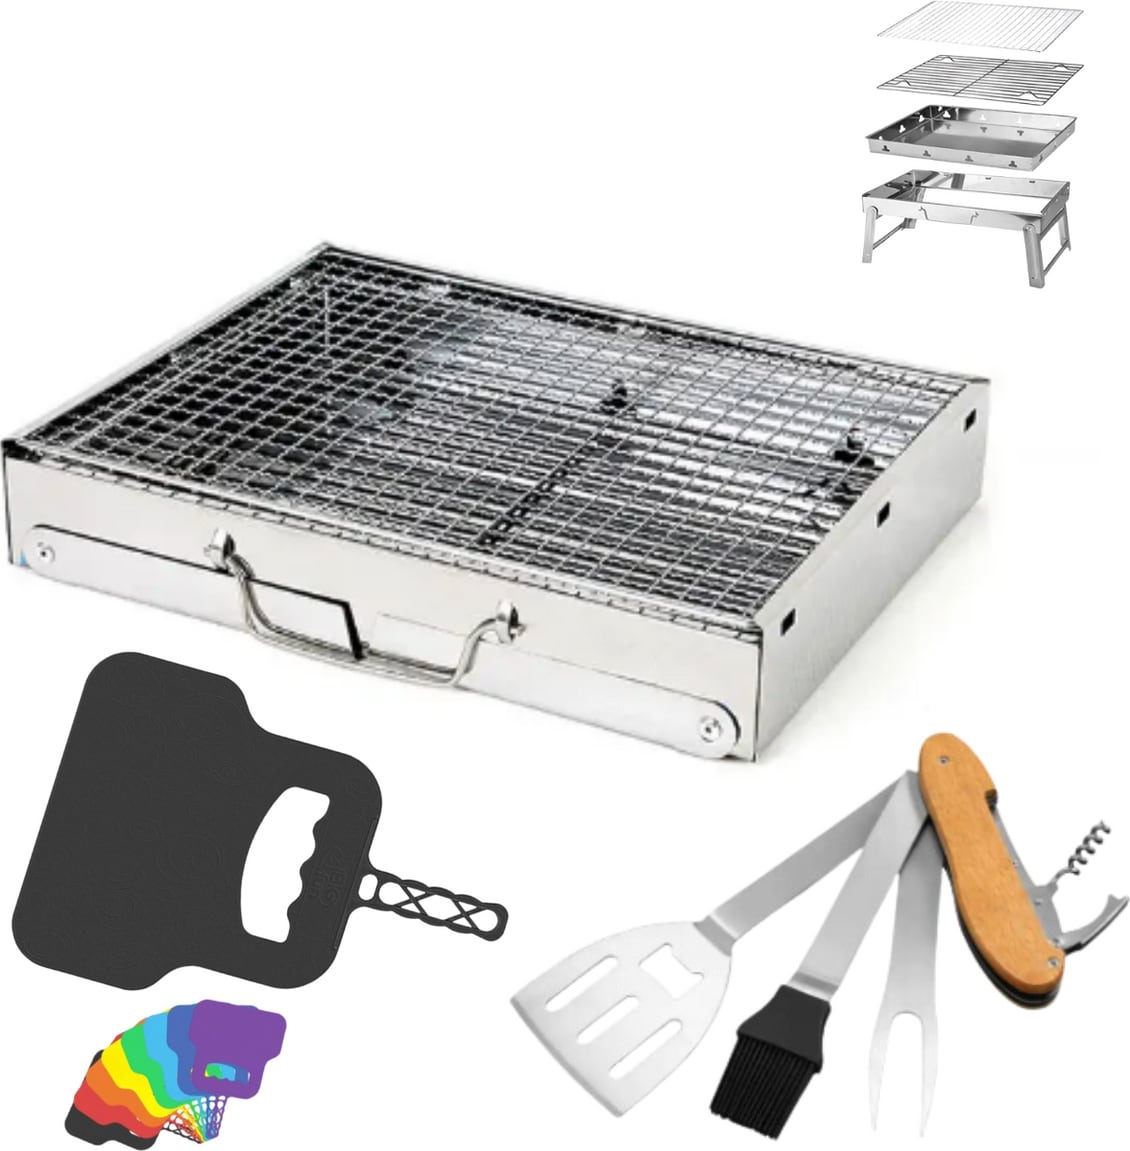 Tool Brothers, Holzkohlegrill, Toolbrothers Outdoor tragbarer Holzkohle Edelstahl Grill Set für Camping werkzeuglose Montage 43 x